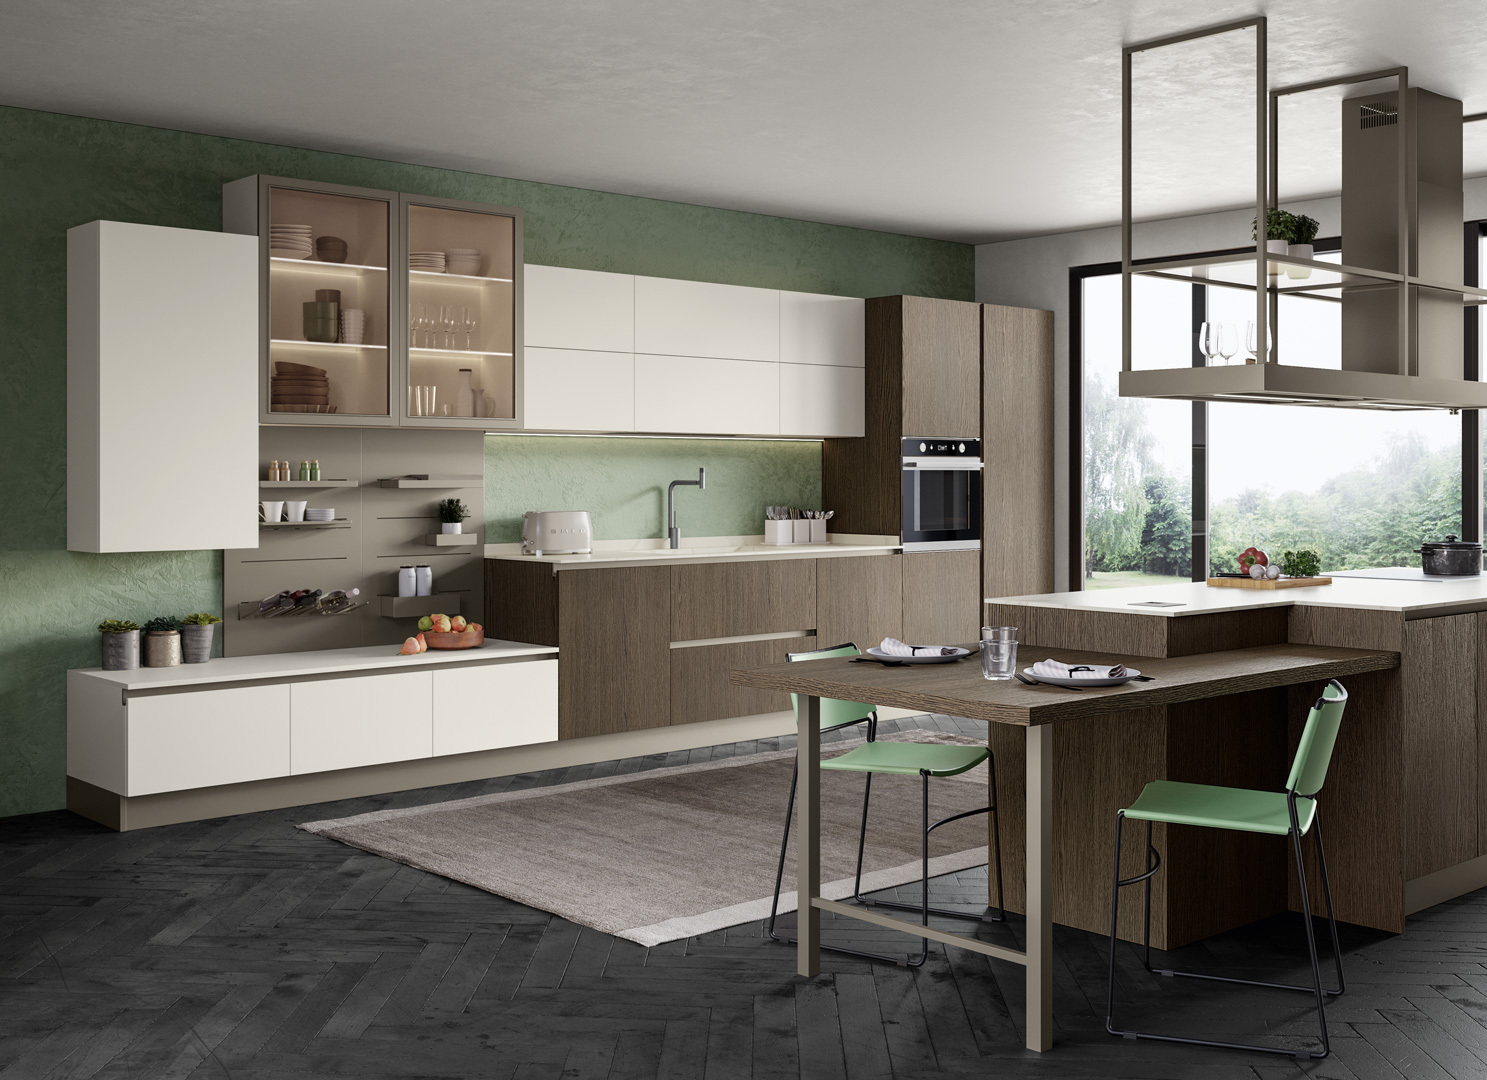 7969_creo-kitchens-tablet-wood-compo-4-2